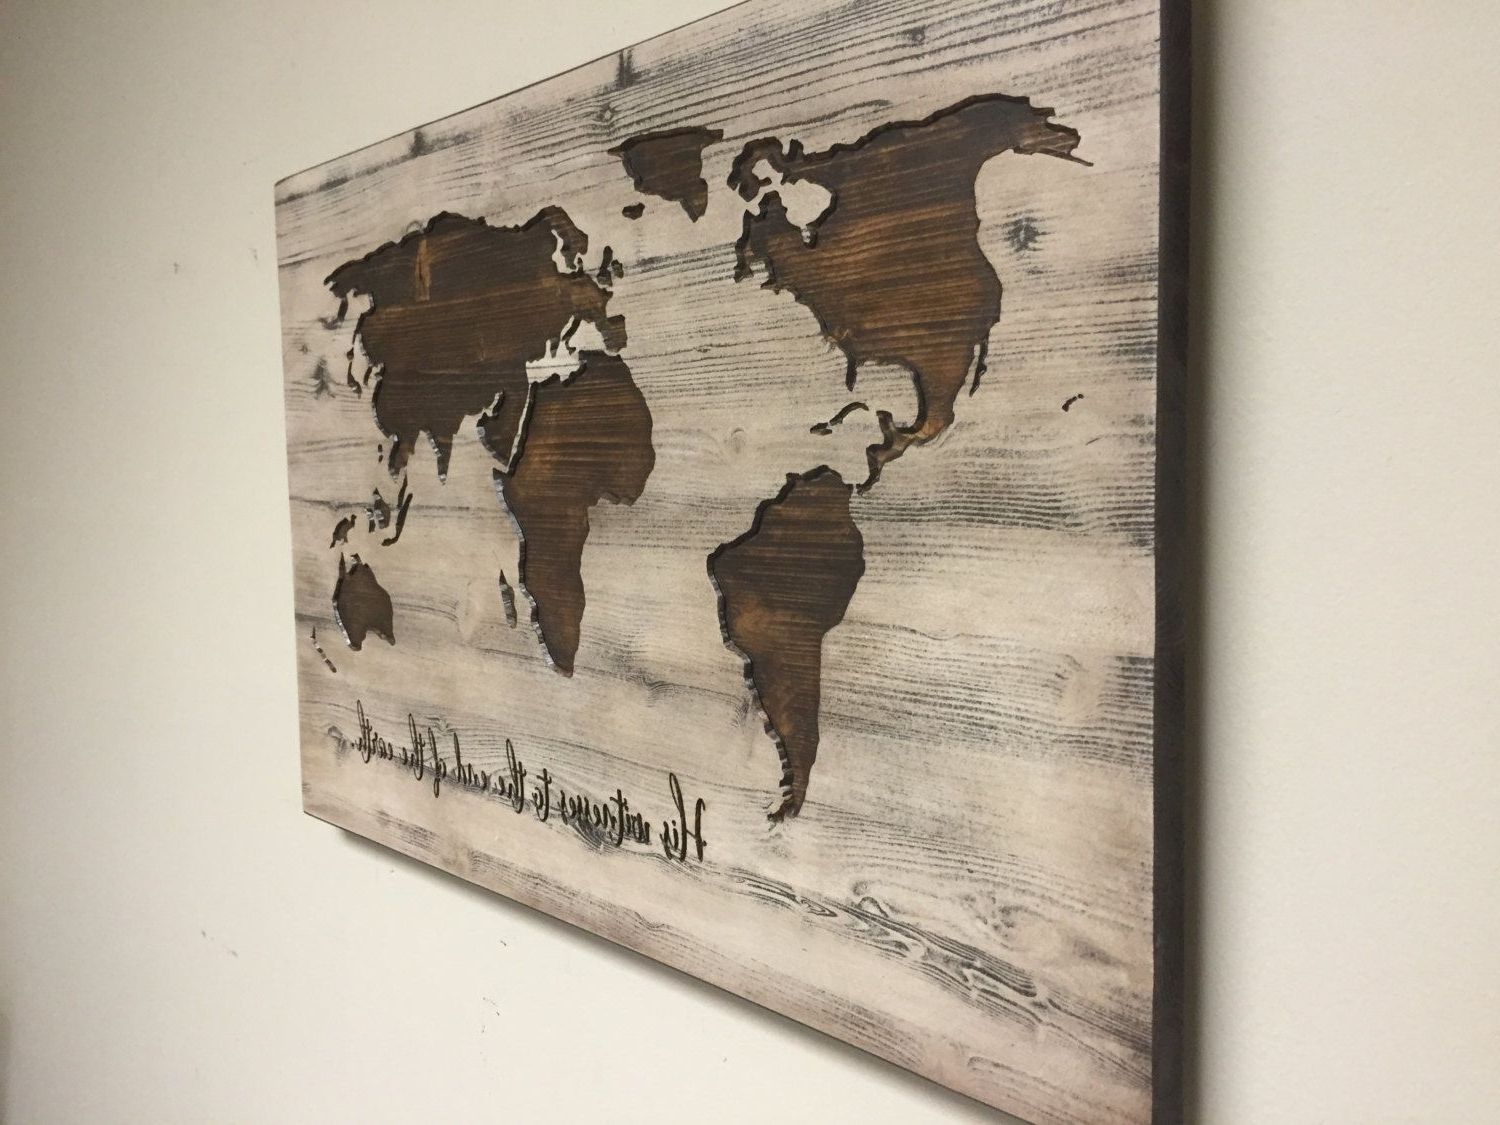 World Map Wall Art, Spiritual, Vintage Carved Wood Map, His Witness In Popular Wood Map Wall Art (View 4 of 20)